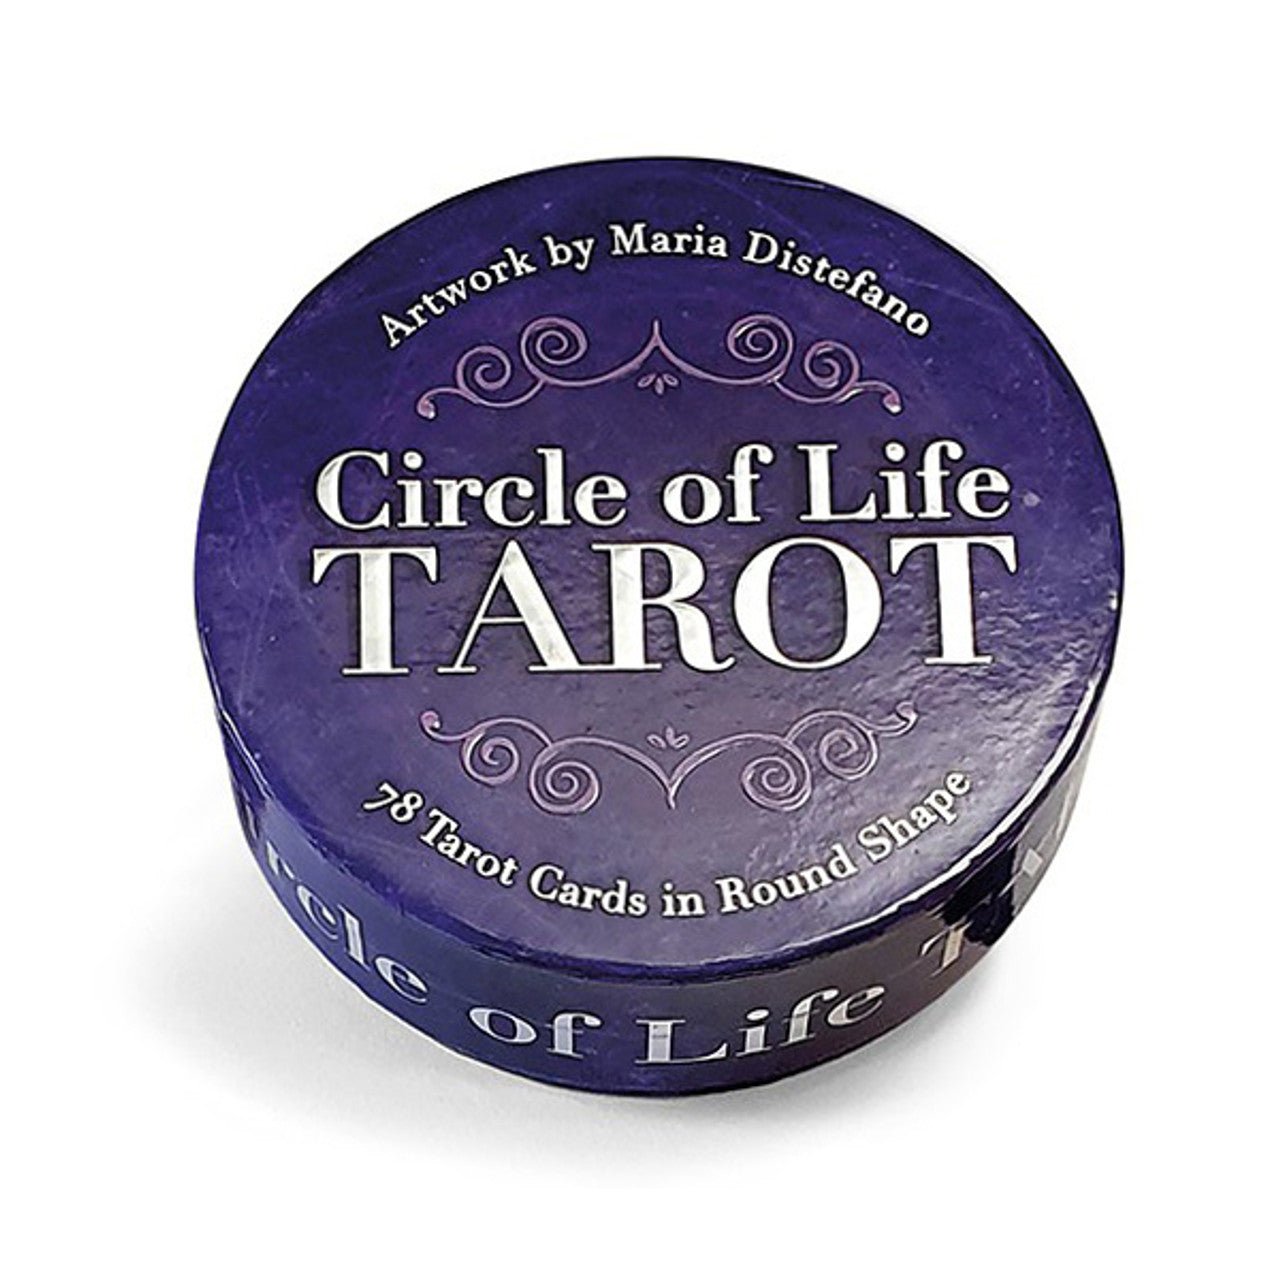 Circle of Life Tarot Cards - Maria Distefano - The Hare and the Moon